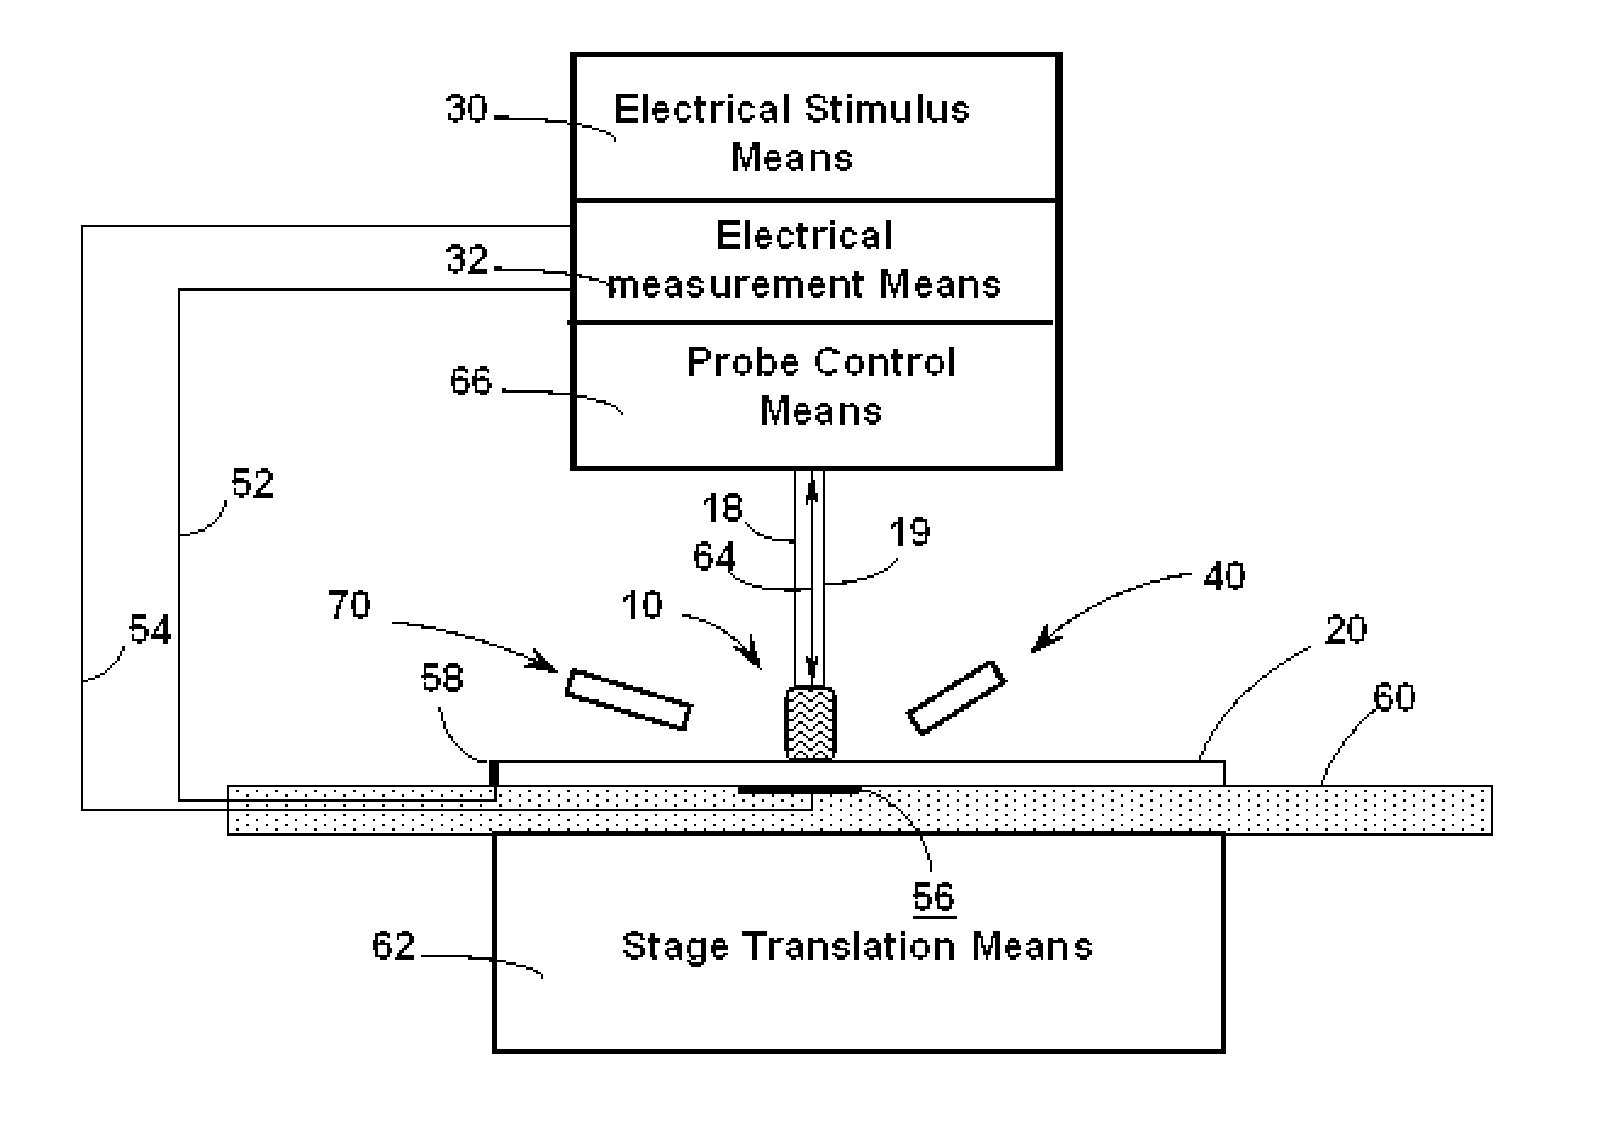 Method and Apparatus for Nondestructively Evaluating Light-Emitting Materials